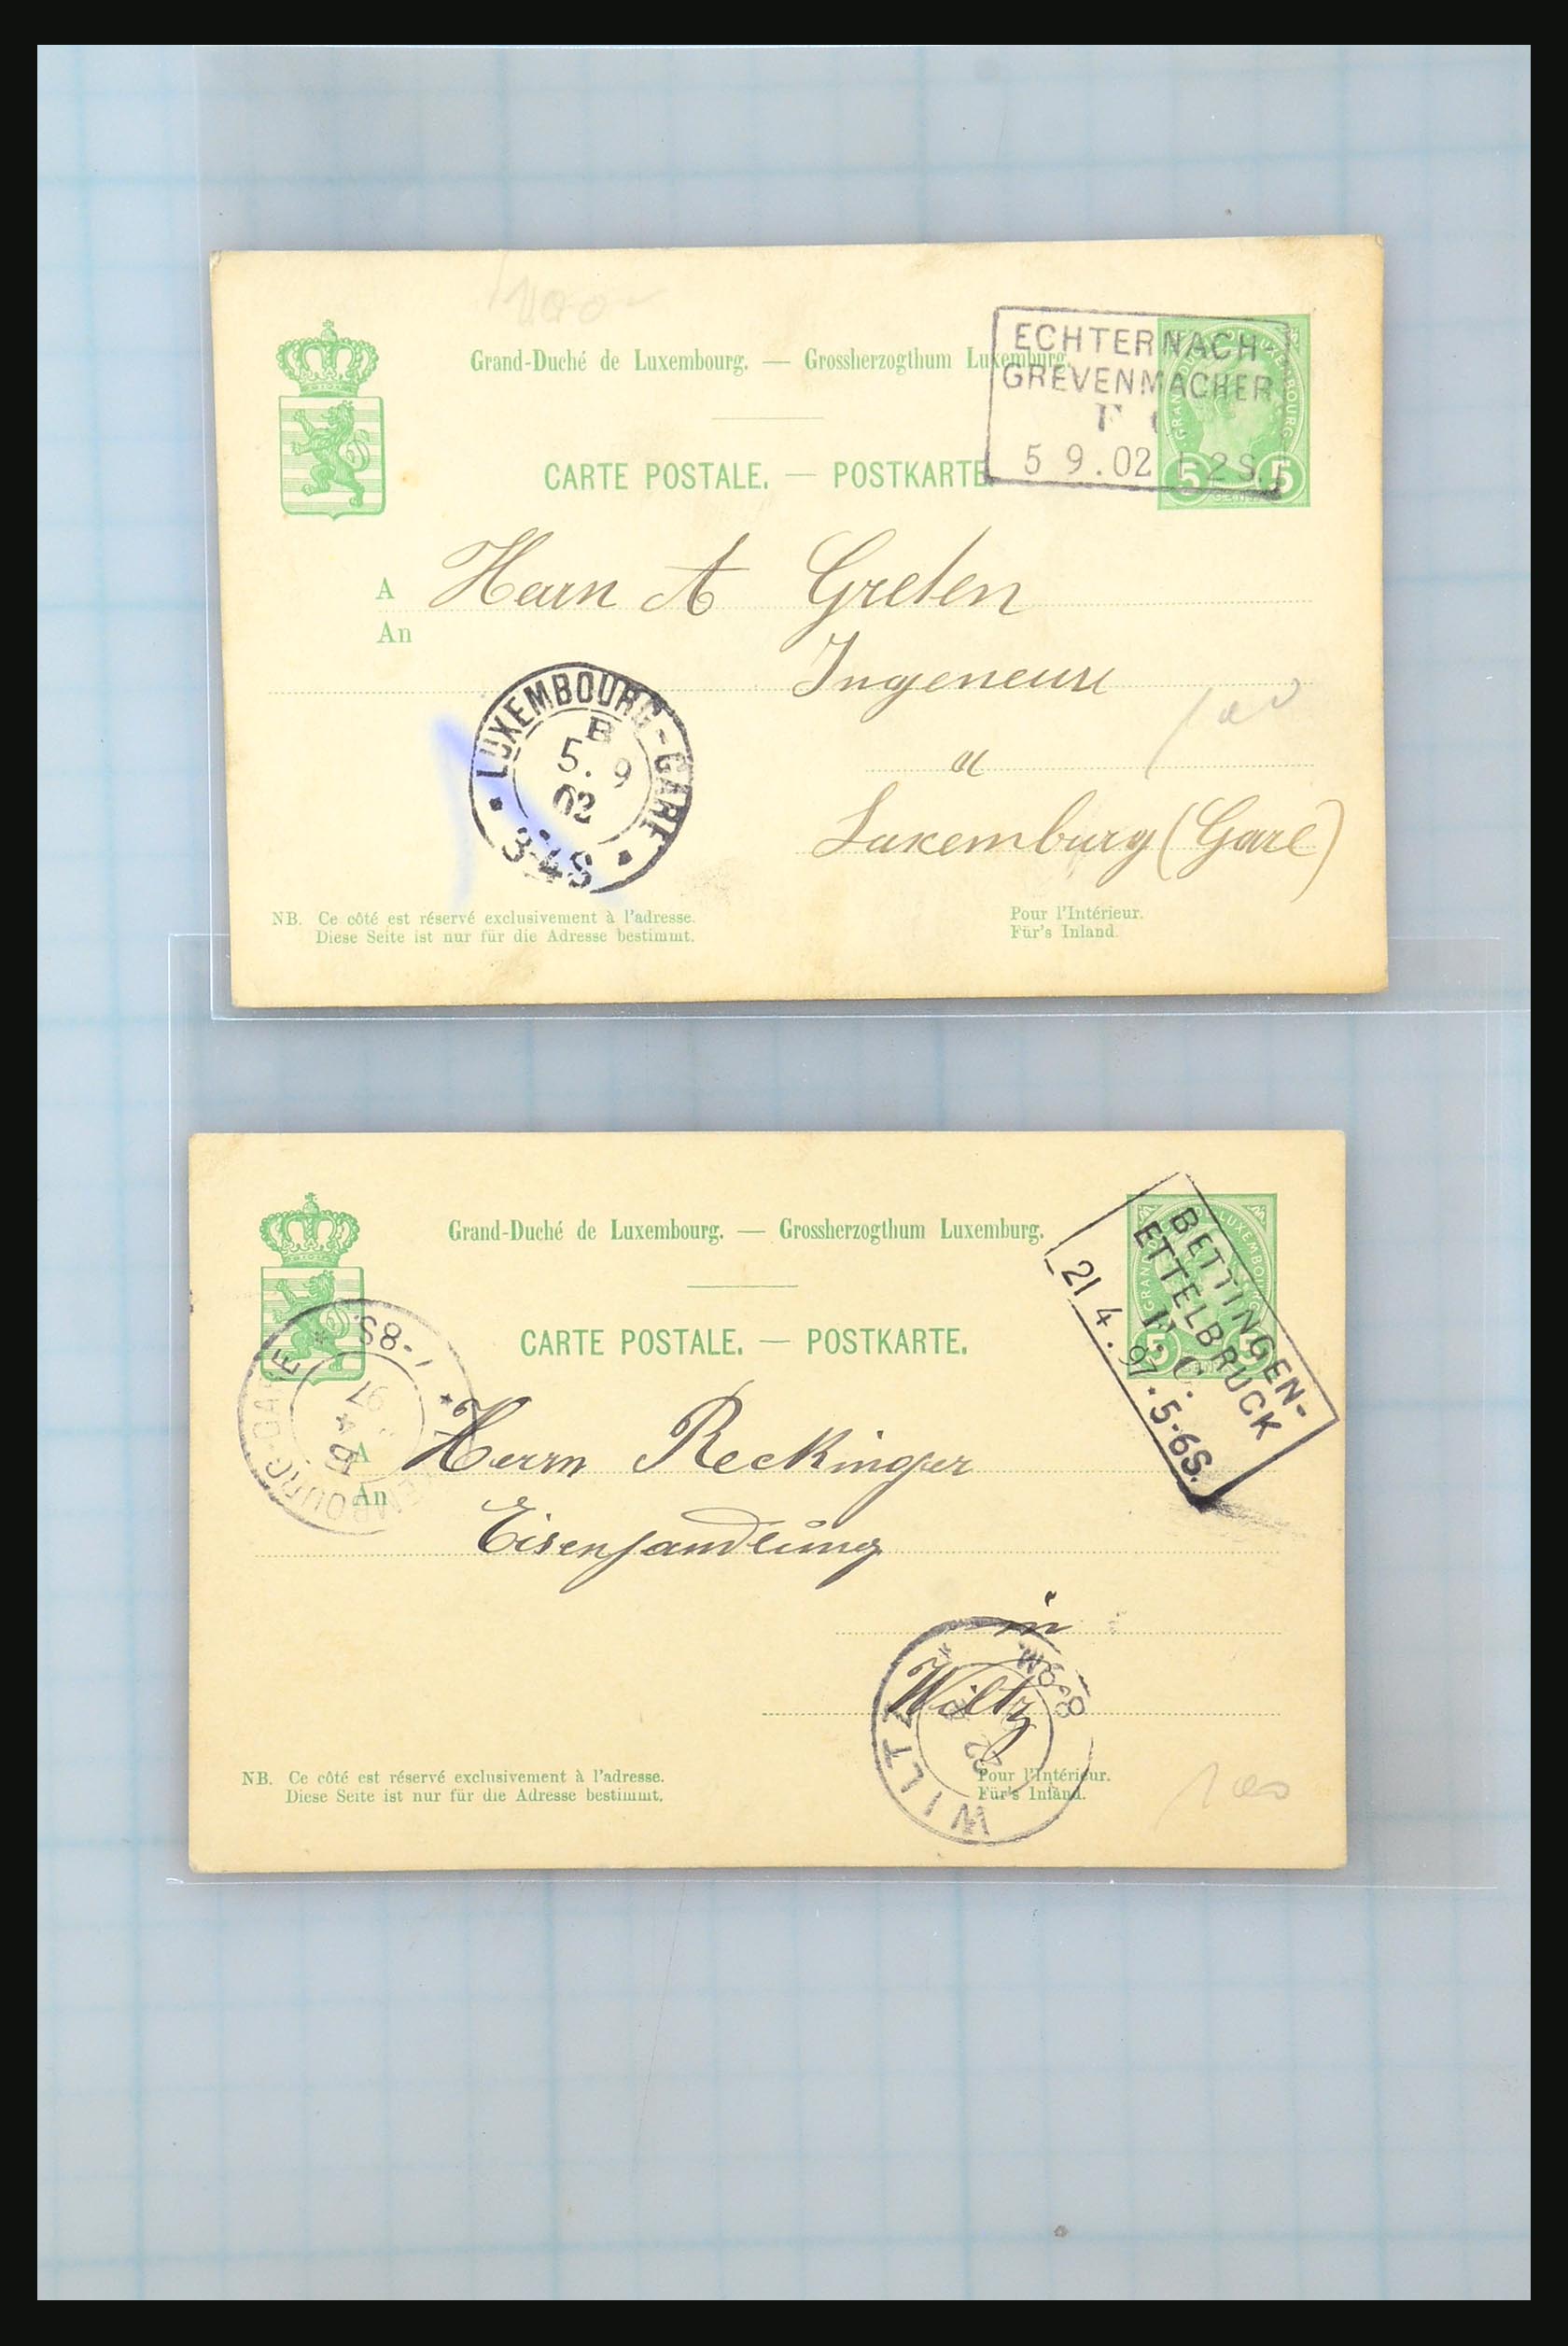 31358 056 - 31358 Portugal/Luxemburg/Greece covers 1880-1960.